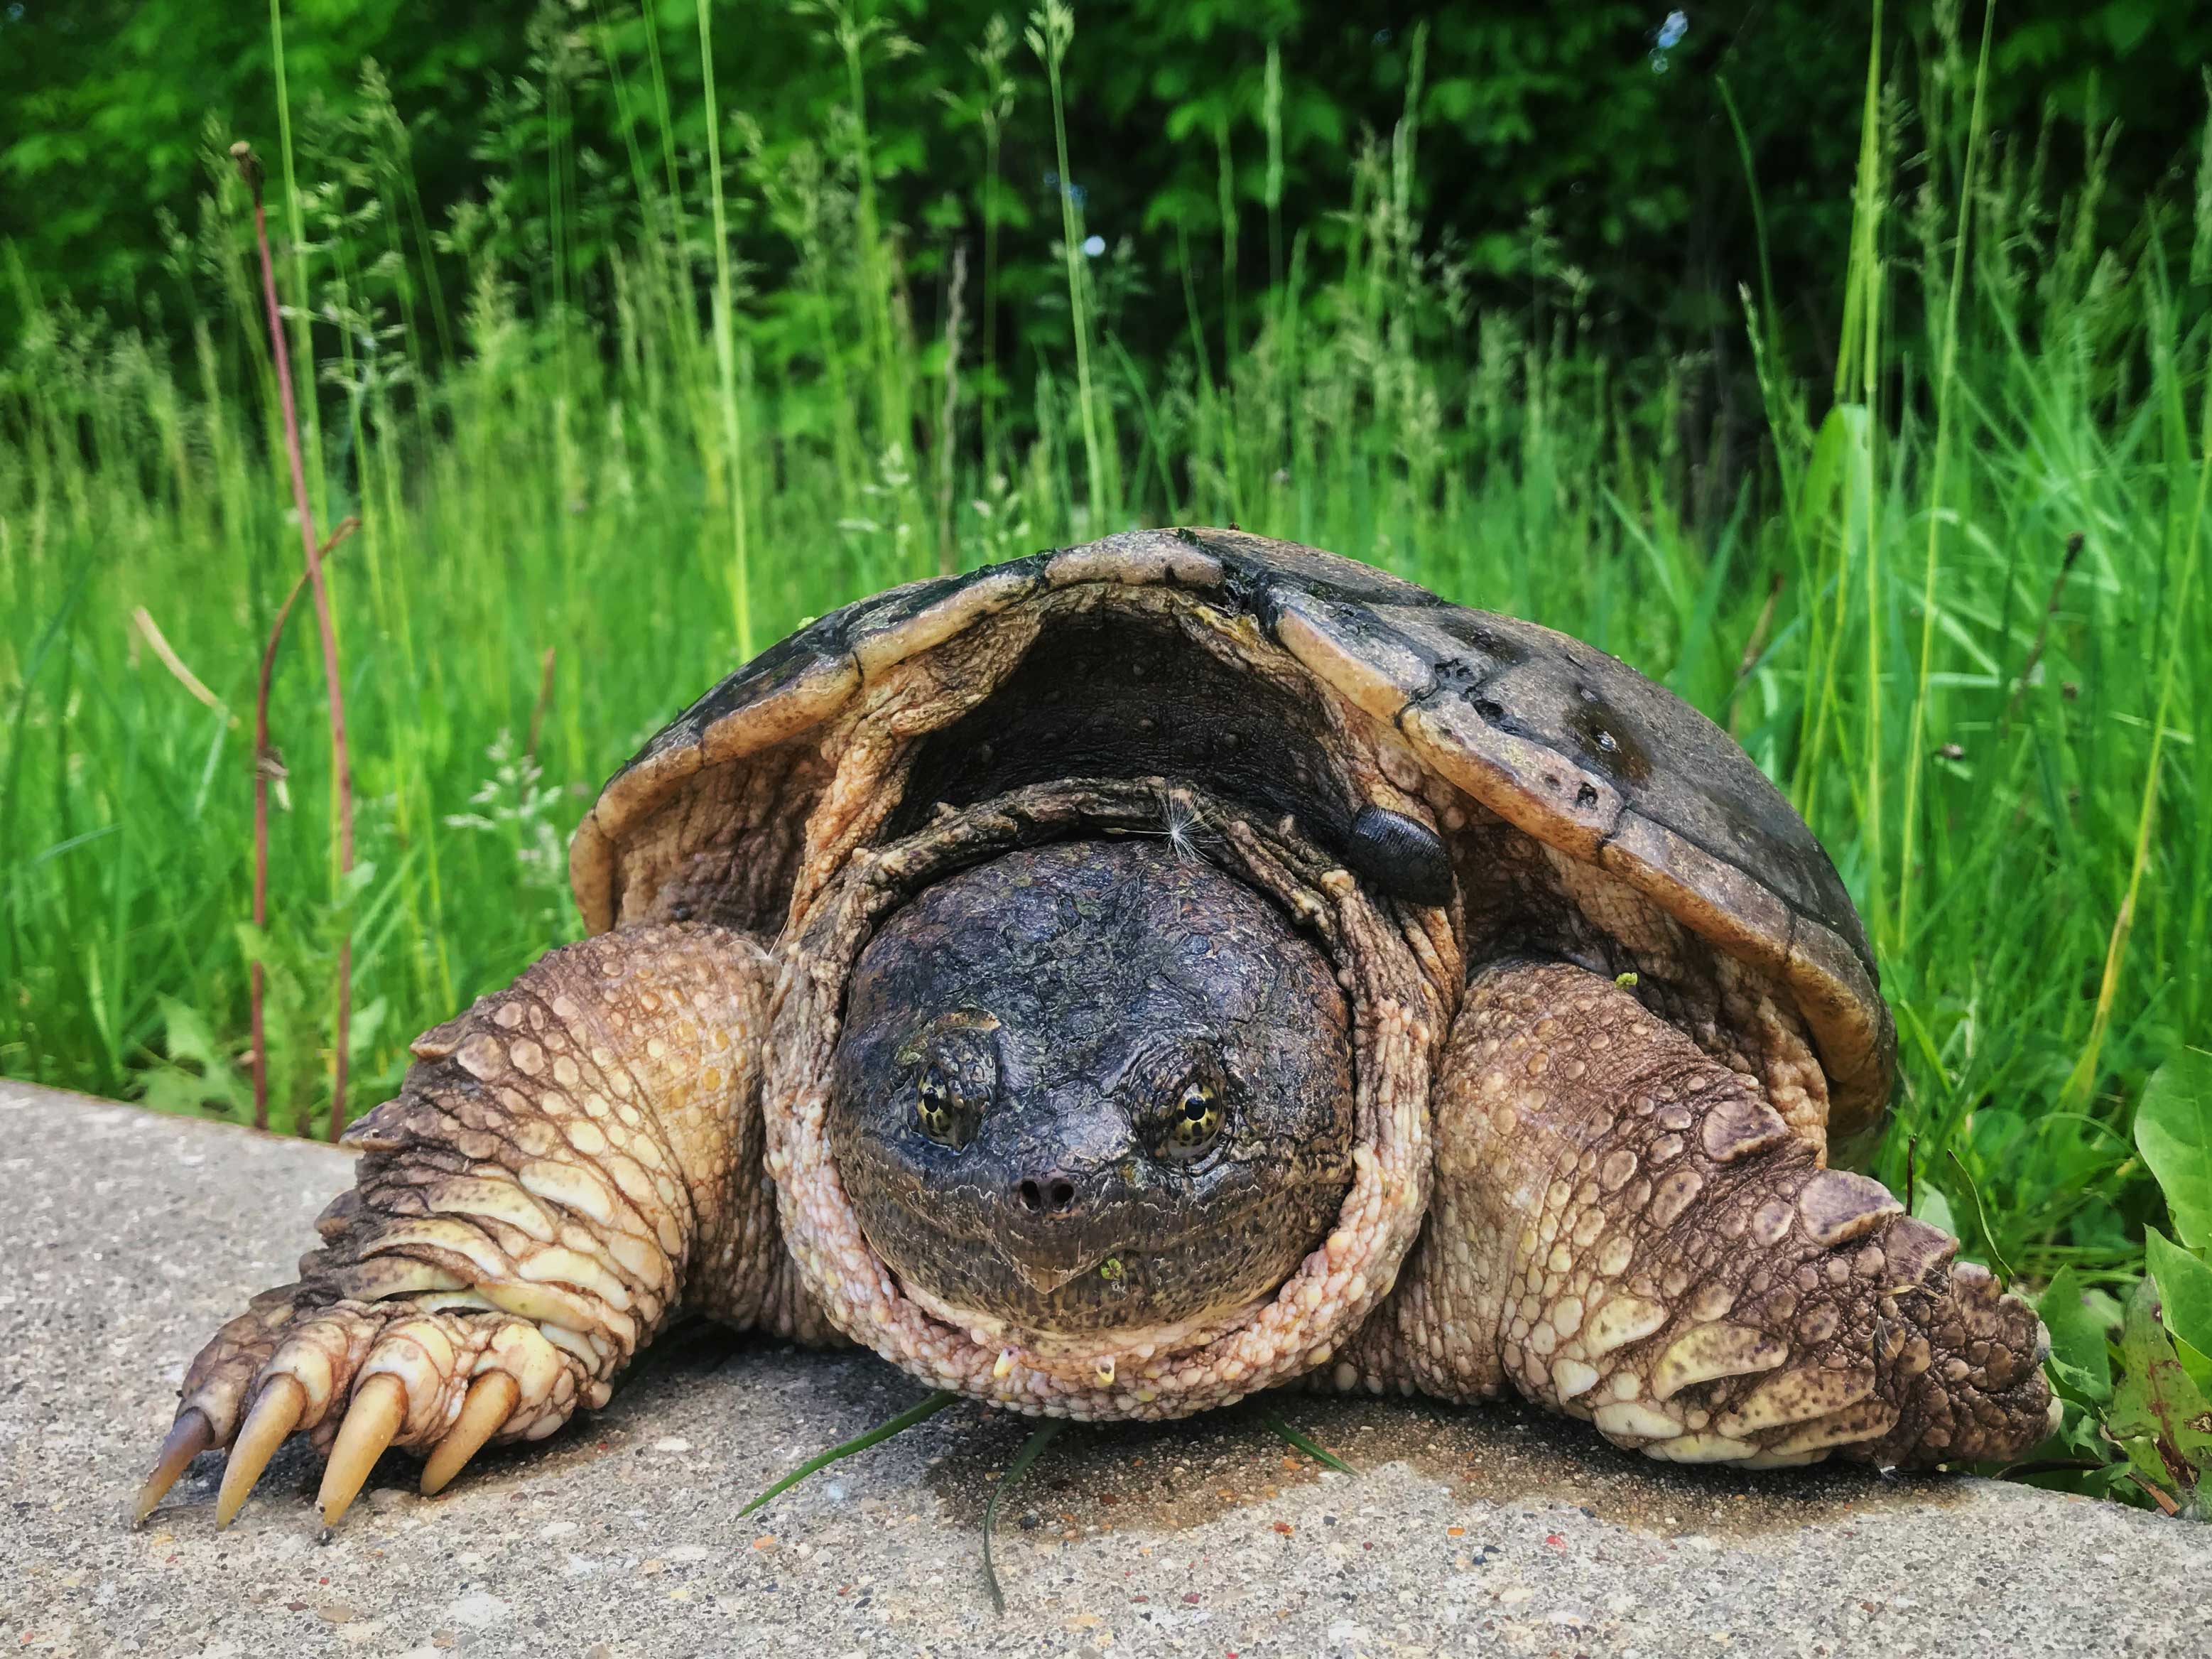 A common snapping turtle on a trail.